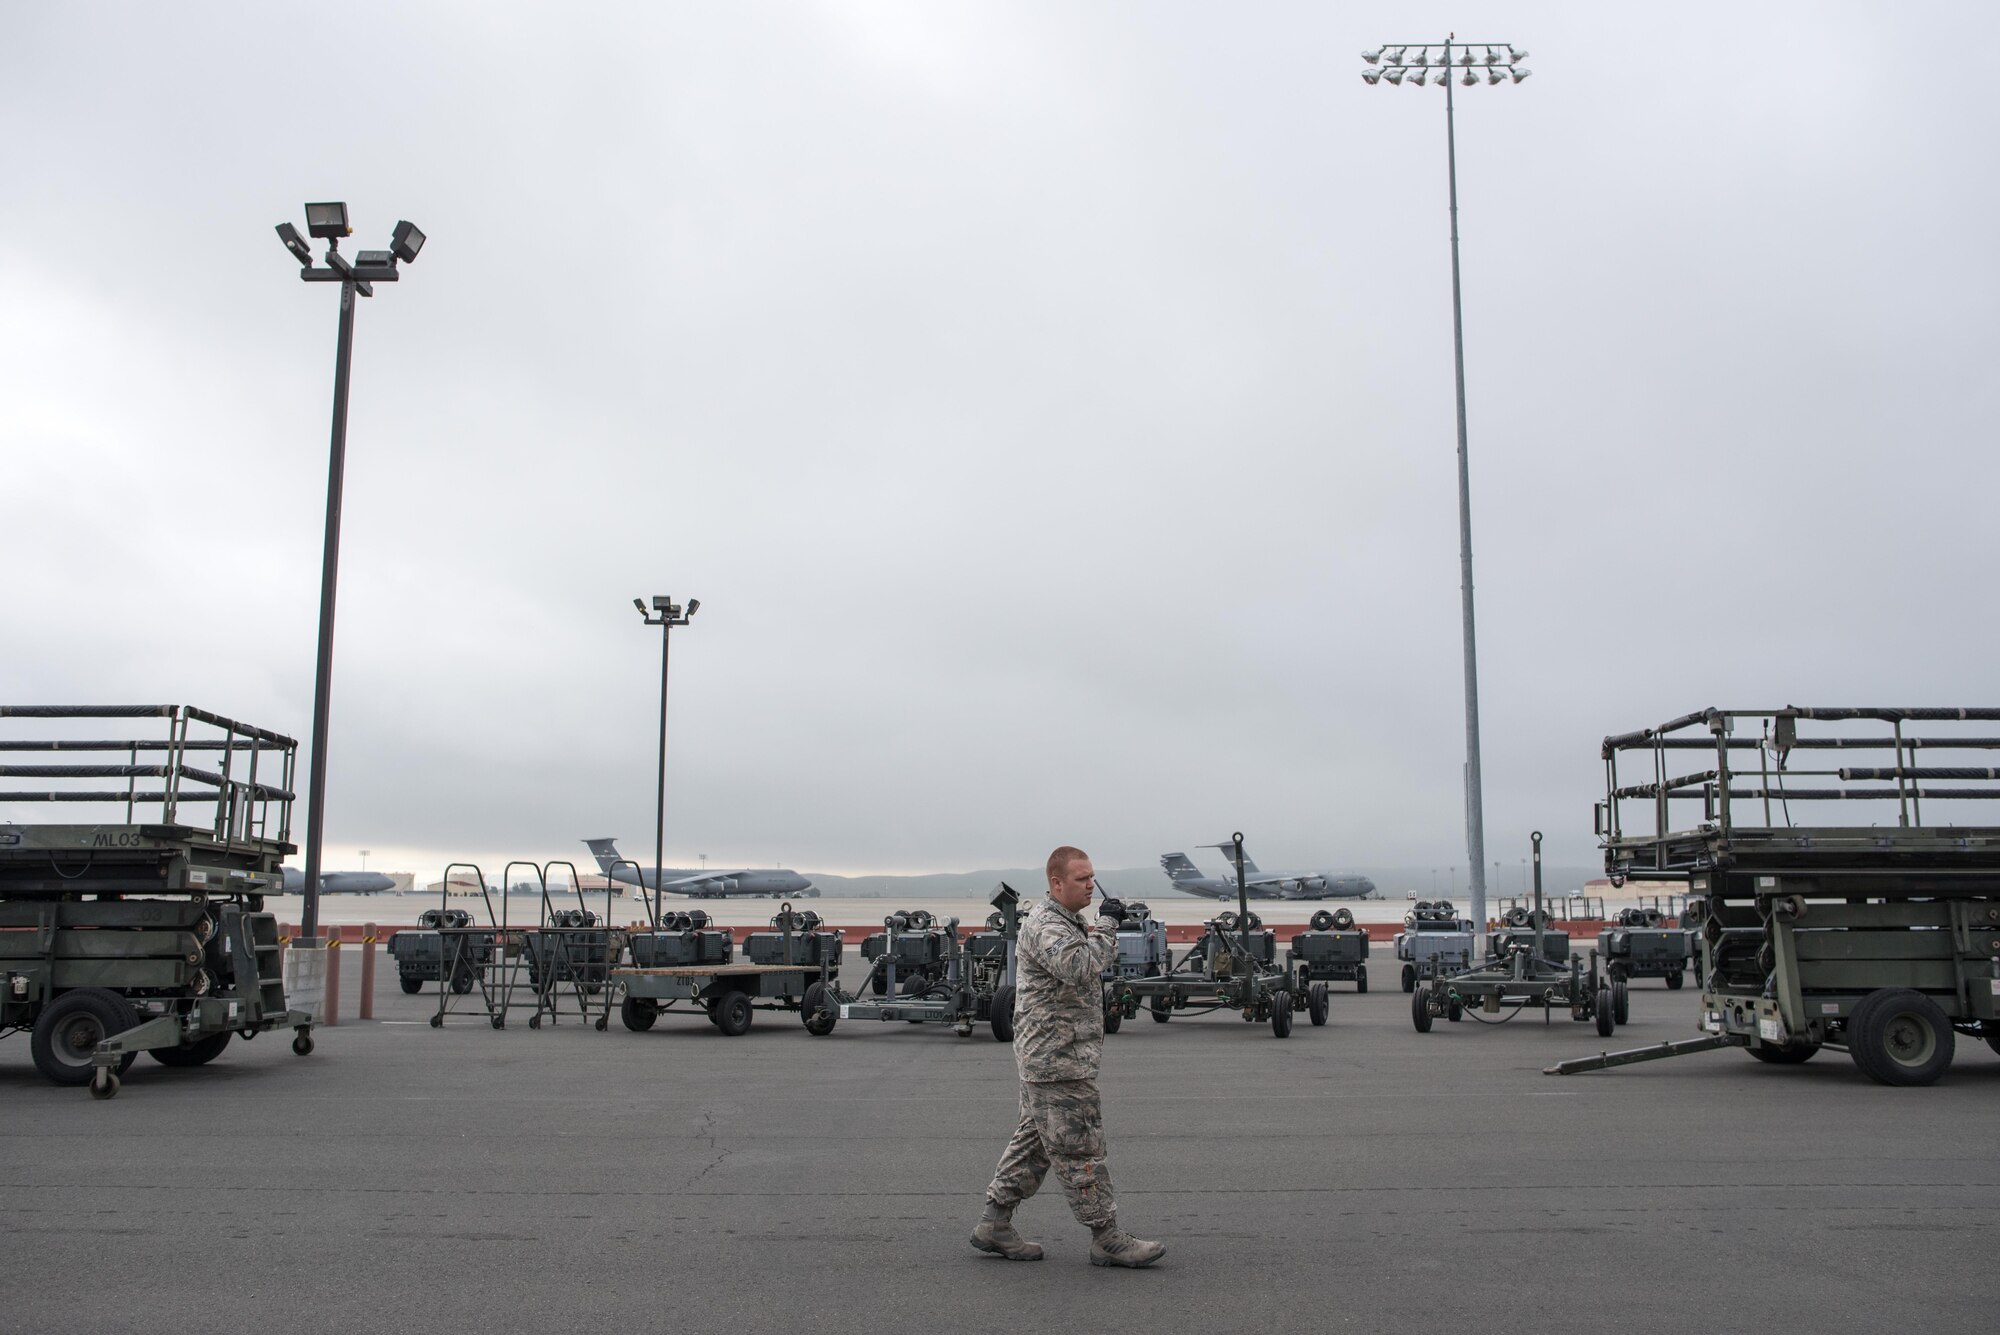 Senior Airman Thomas Ribeiro, 60th Aerospace Ground Equipment Flight mechanic, walks through a ready line of equipment staged to support aircraft mechanics and crew chief on a moment’s notice at Travis Air Force Base, Calif., on Nov. 15, 2016. Ribeiro currently works as a dispatcher and a kind of “roving mechanic,” helping keep aircraft maintenance on schedule. The AGE shop provides more than 500 pieces and 53 types of equipment 24 hours per day, every day. (U.S. Air Force photo by Ken Wright)